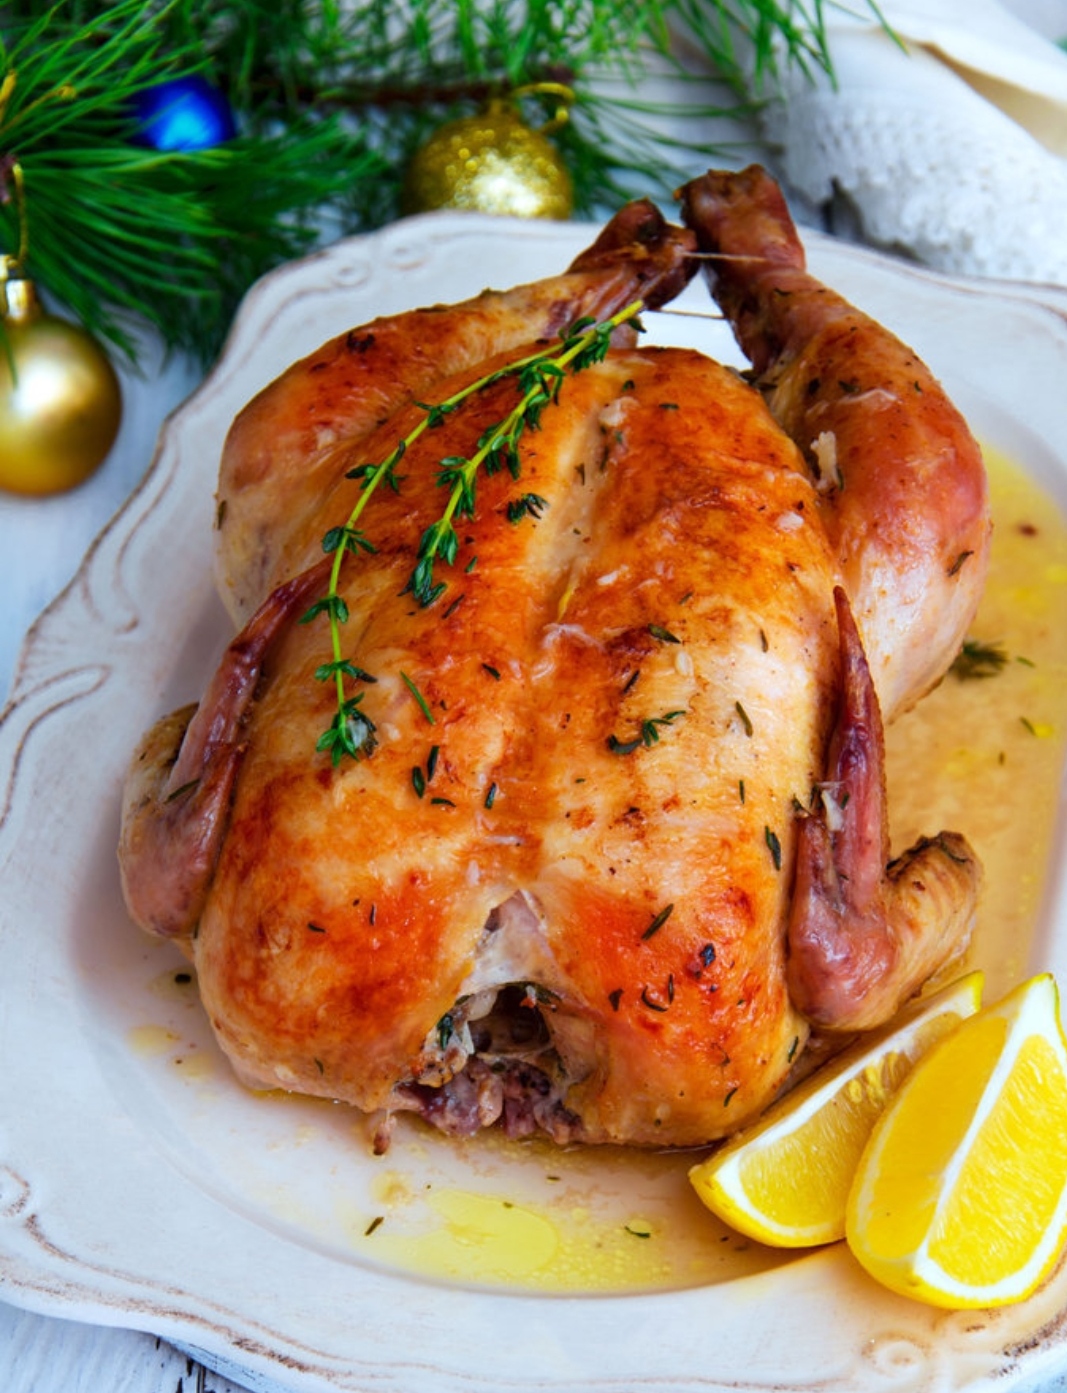 Oven chicken with white wine, lemon and garlic